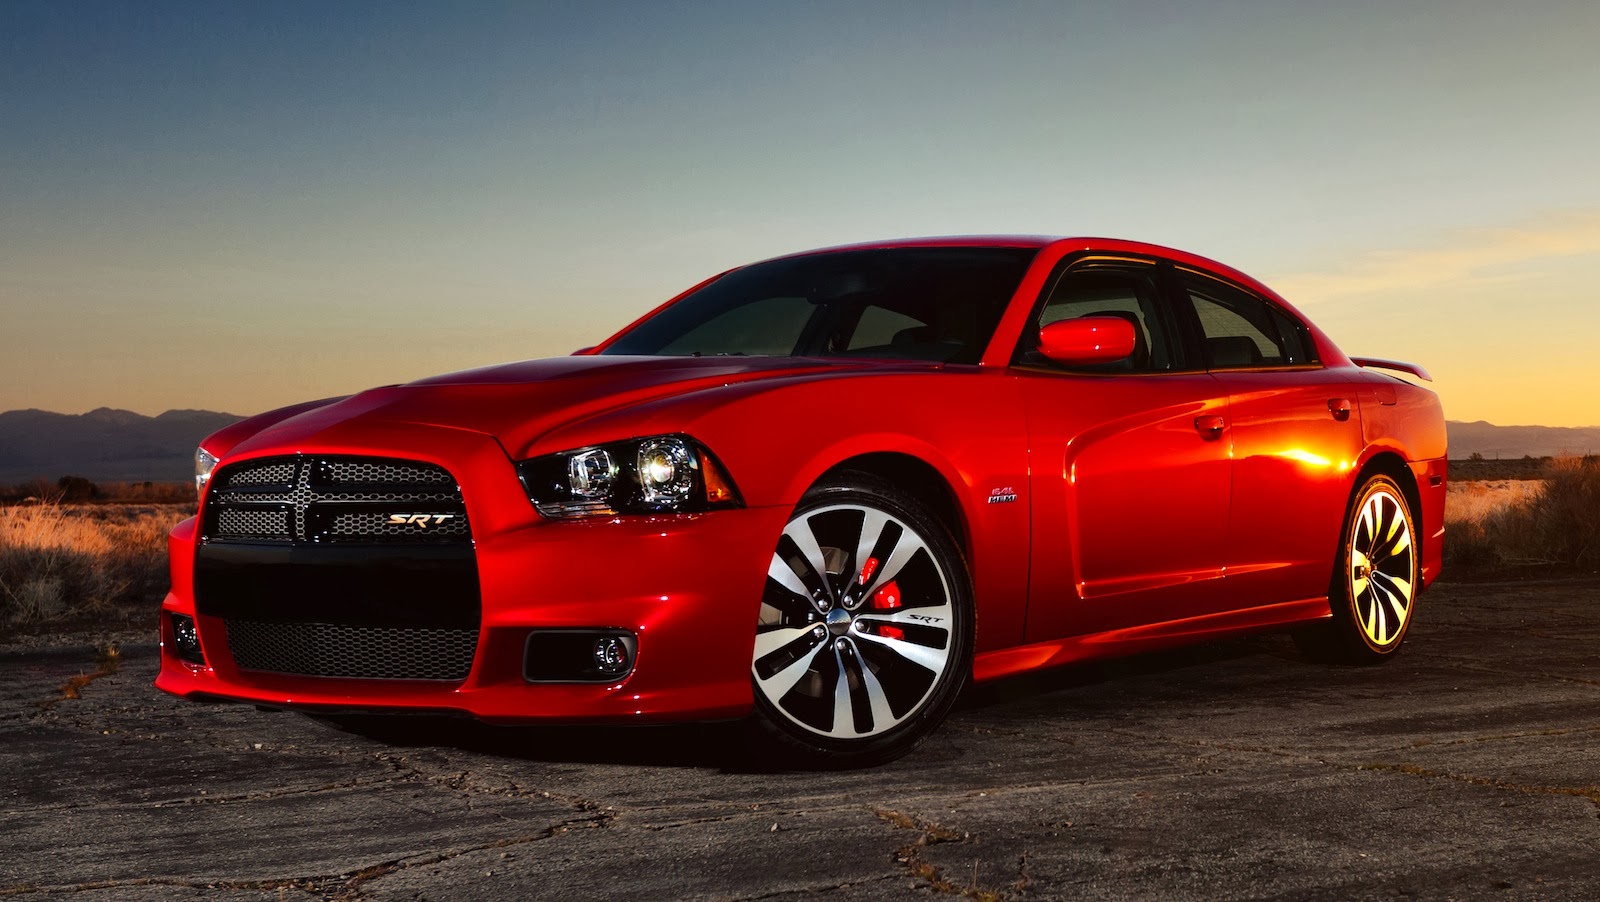 Dodge Charger 2014 HD Wallpapers - HDWallpapers360 | HD Wallpapers Free